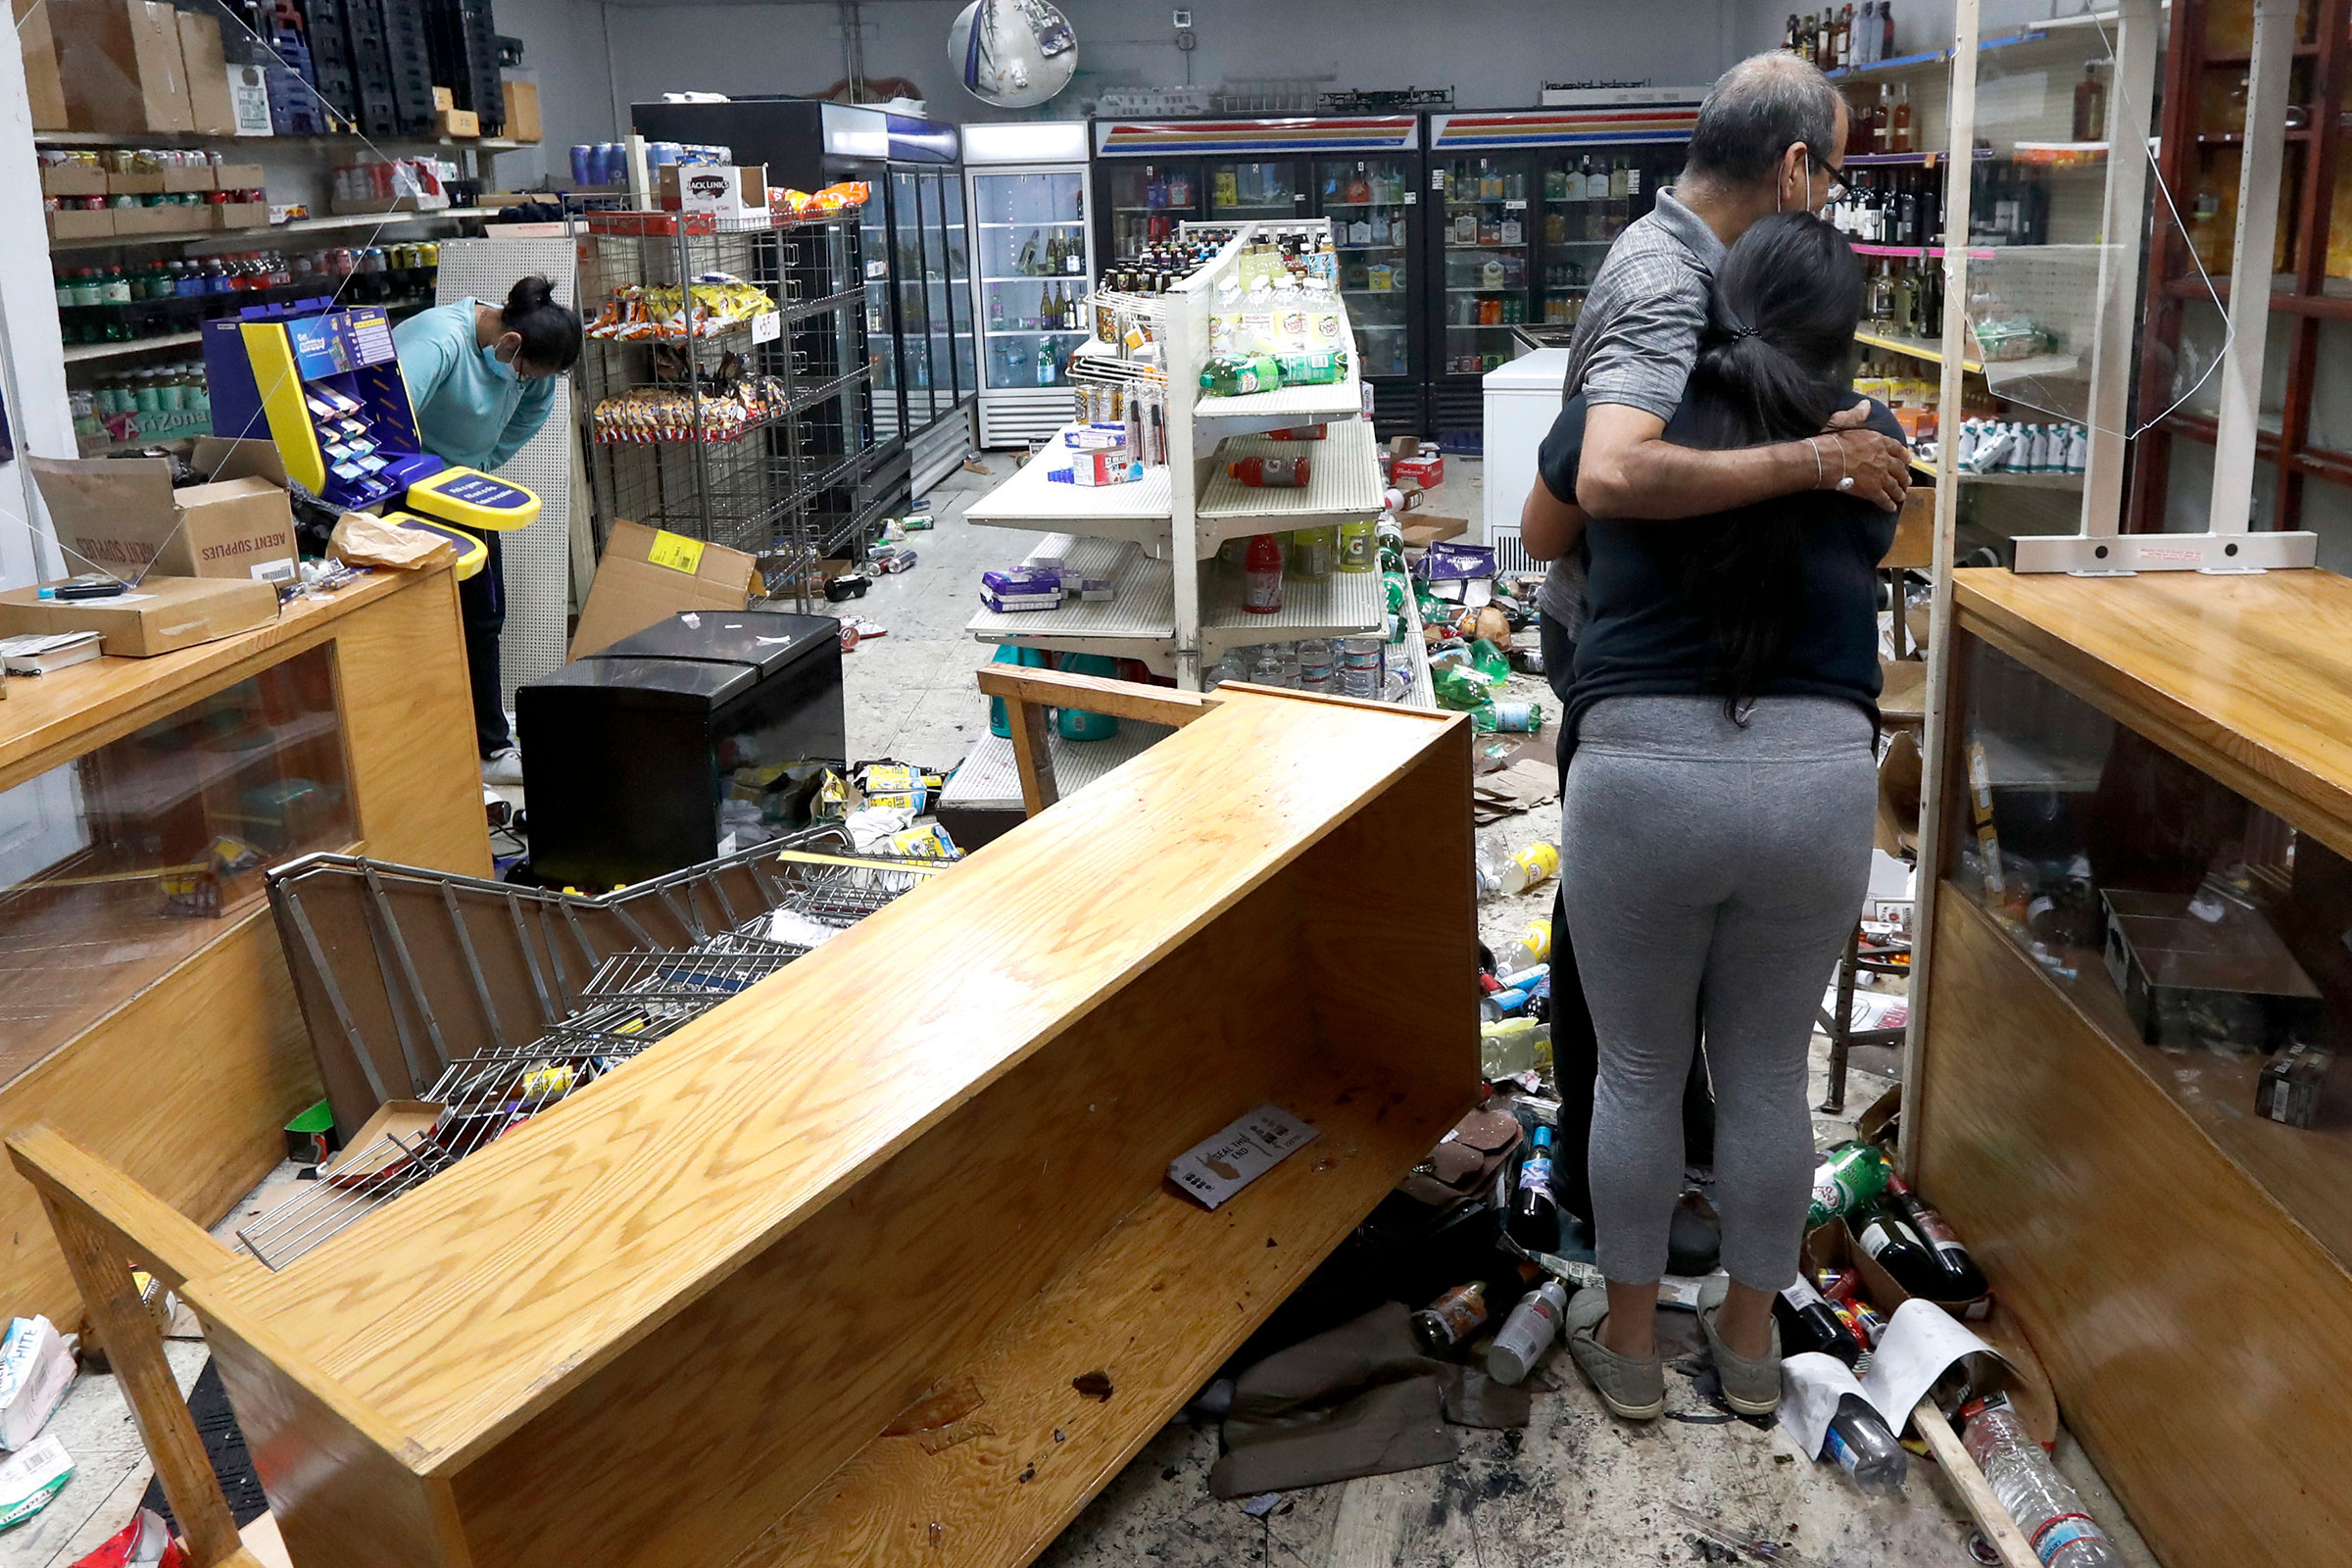 Yogi Dalal hugs his daughter Jigisha as his other daughter Kajal, left, bows her head at the family food and liquor store on, Aug. 10, 2020, after the family business was vandalized in Chicago. (Charles Rex Arbogast—AP)